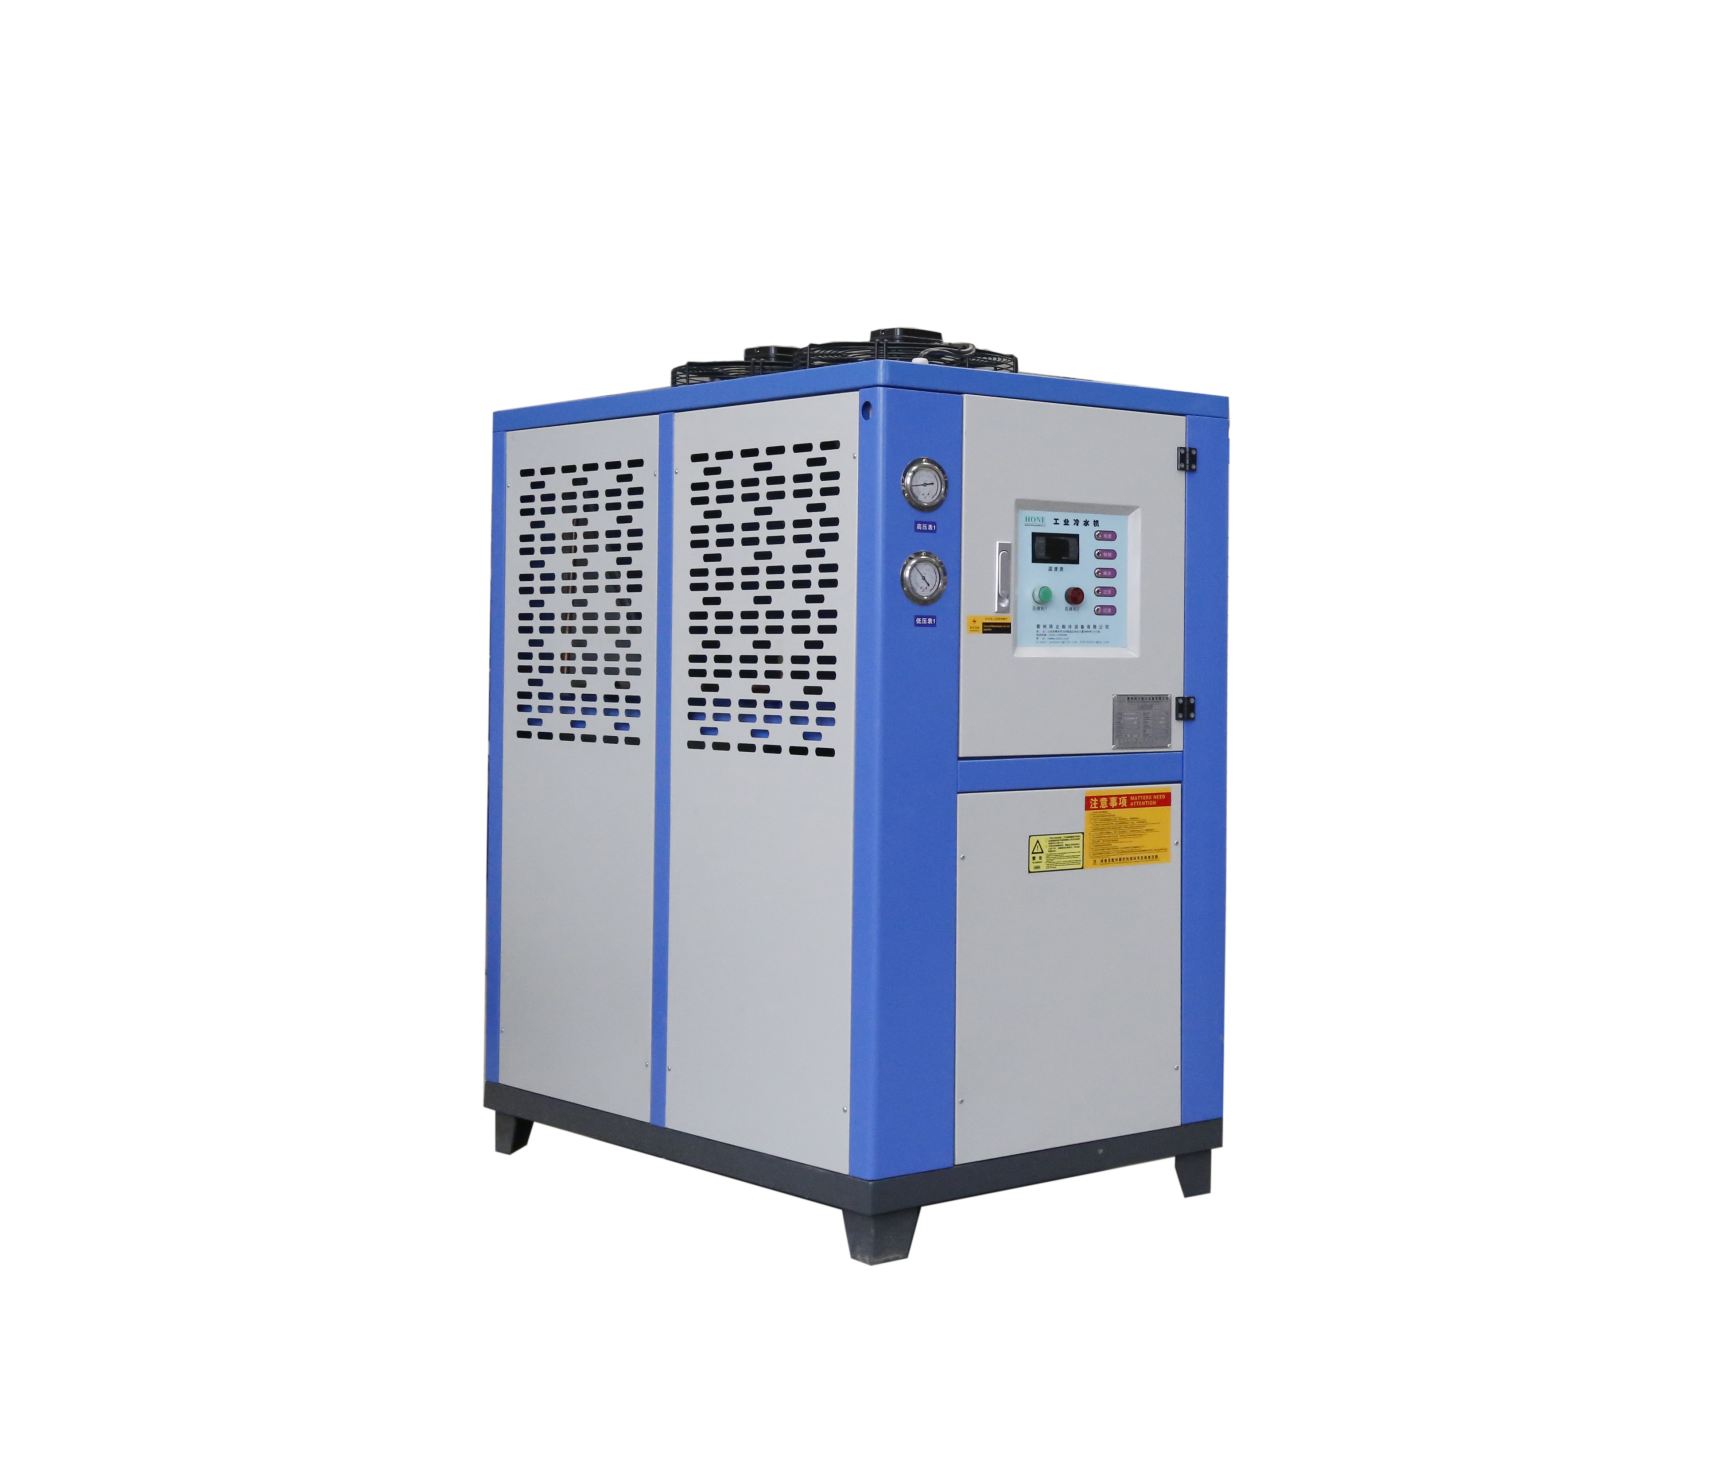 chillers air conditioning systems industrial air cooled water chiller cooling